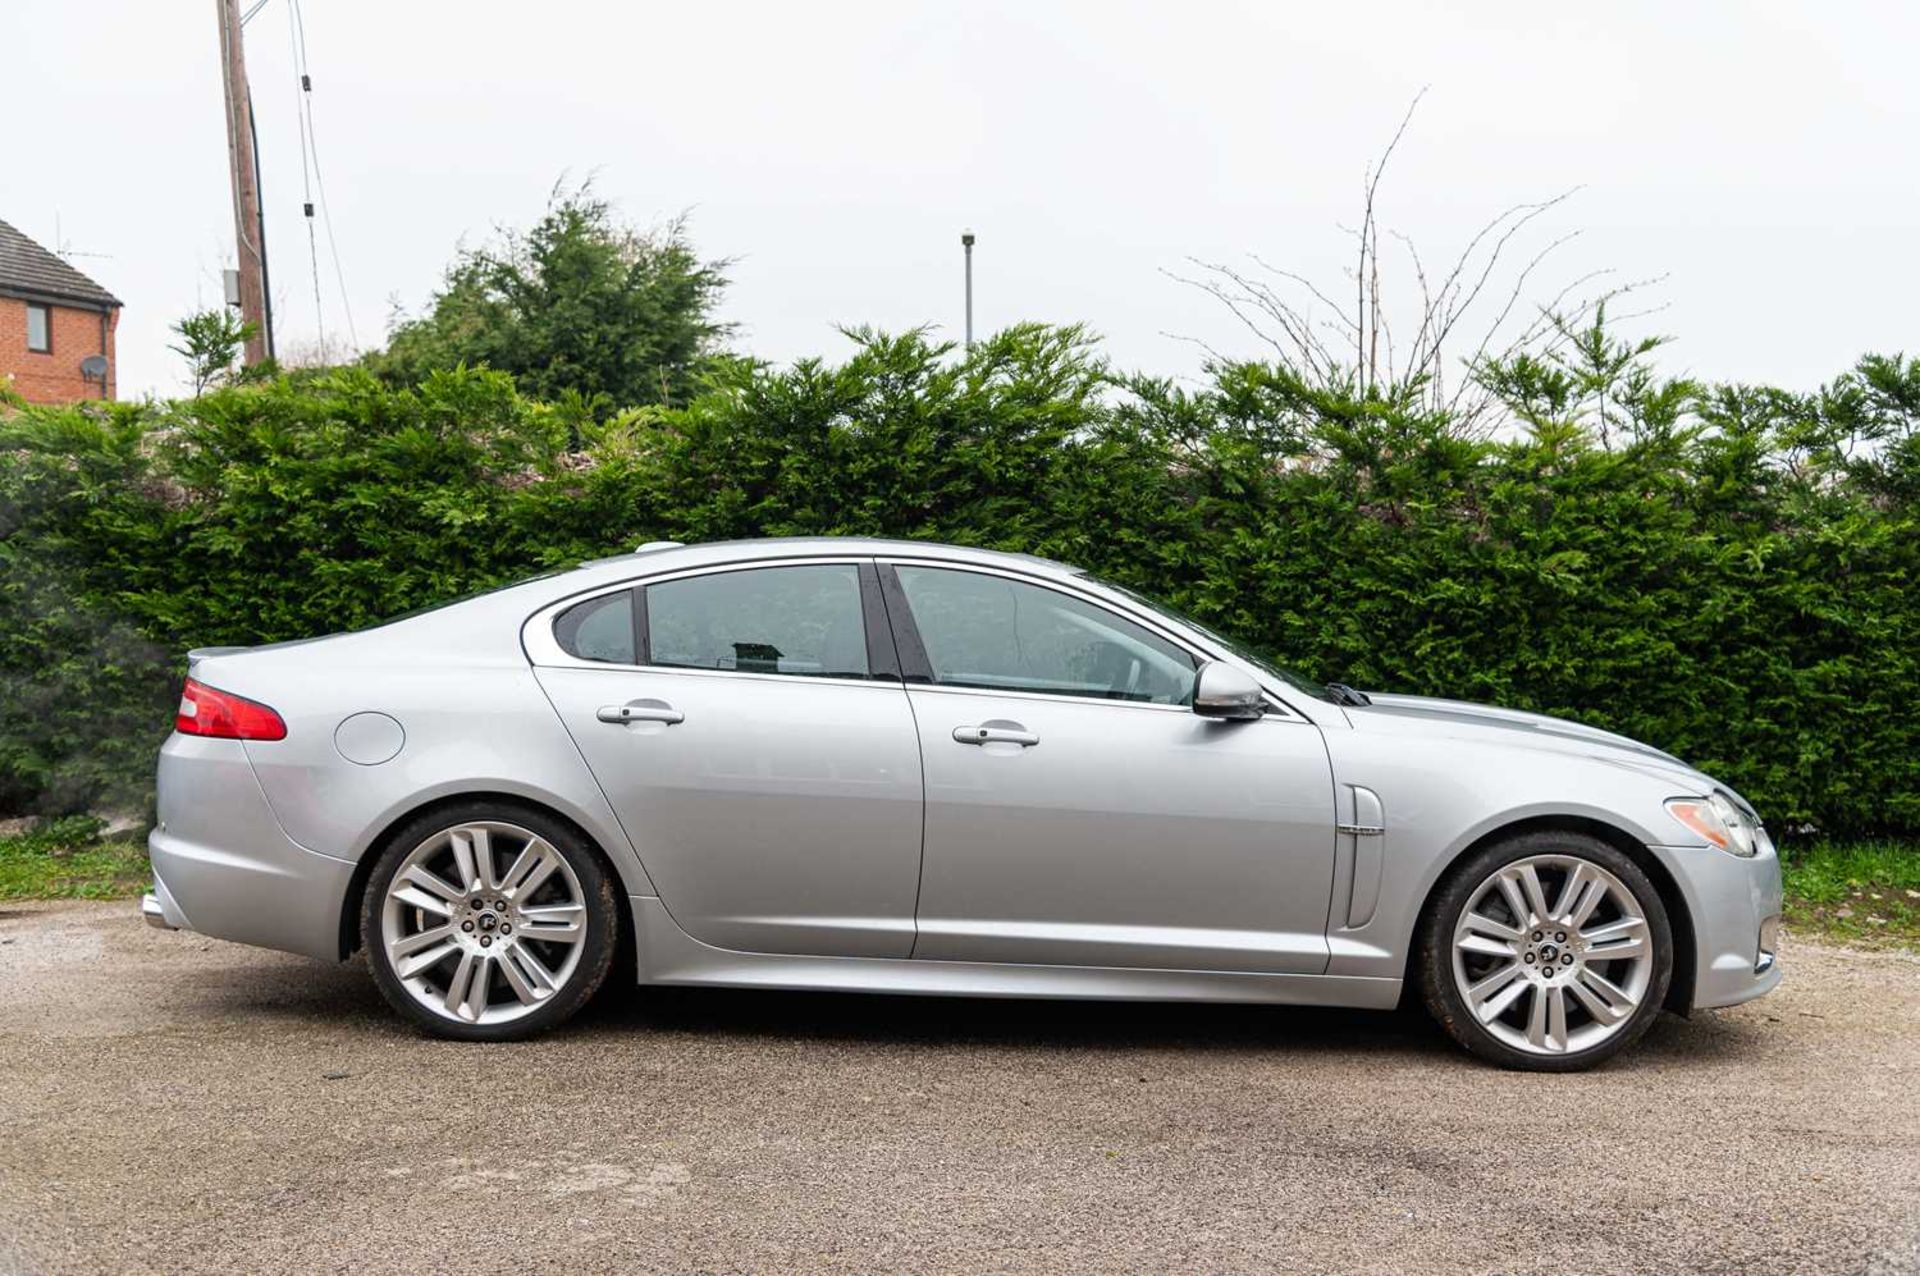 2009 Jaguar XFR Saloon 500 horsepower four-door super saloon, with full service history - Image 16 of 81